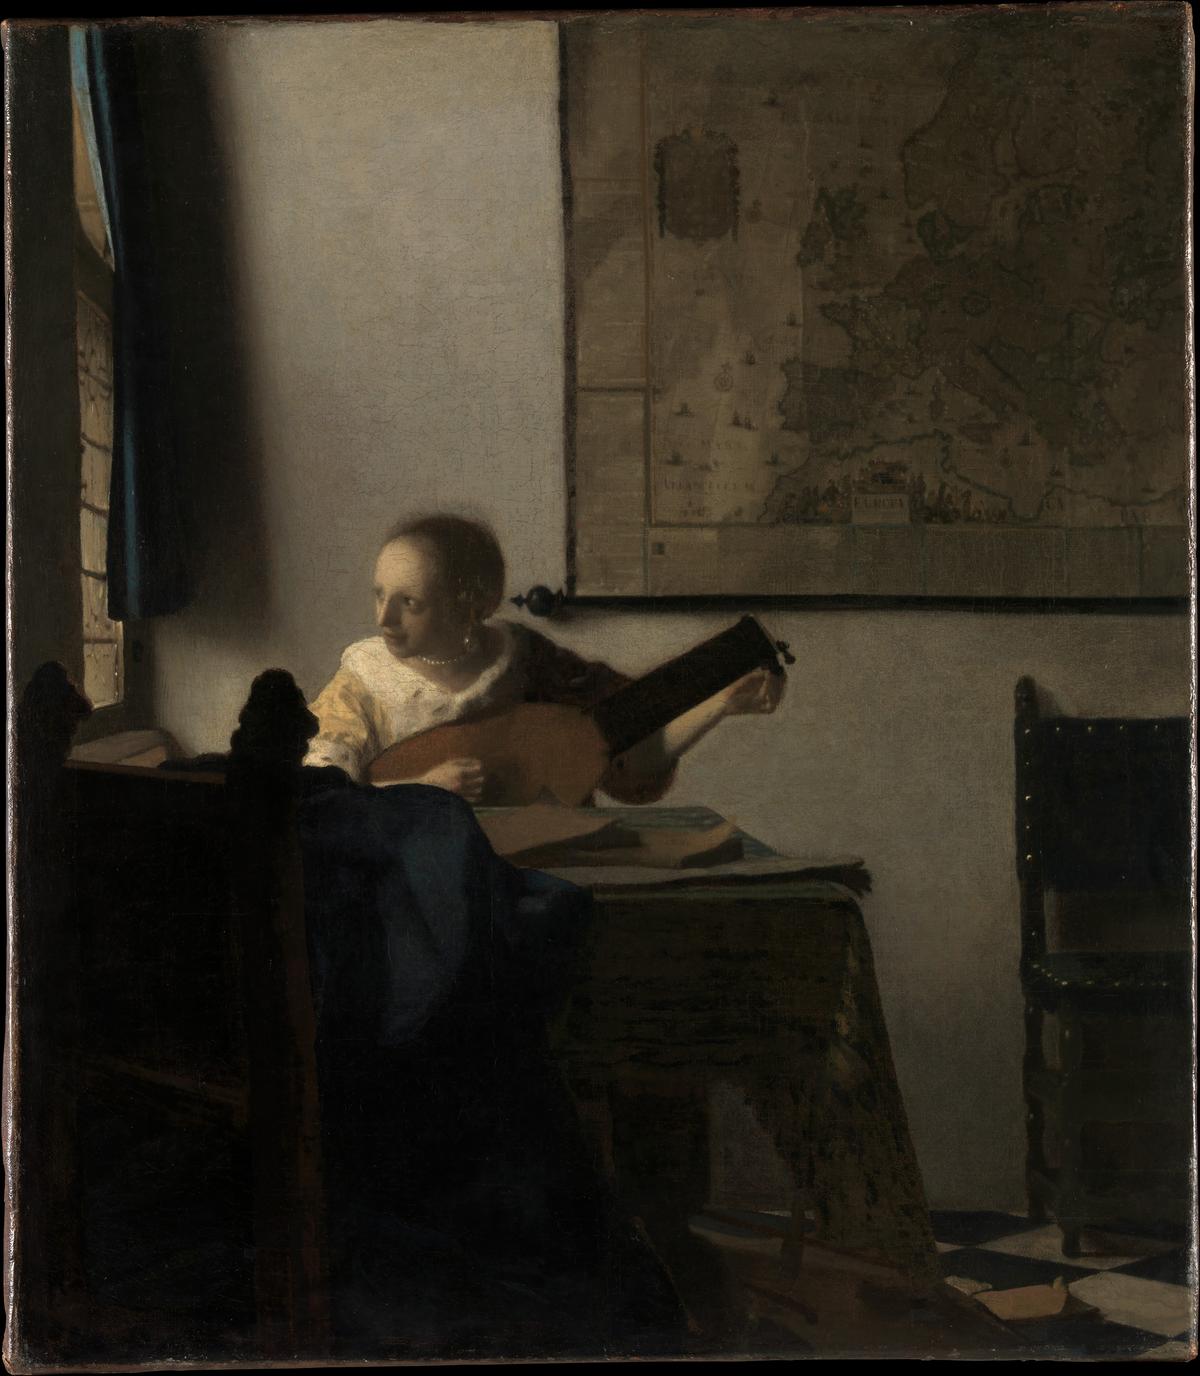 "Young Woman With a Lute," circa 1662–63, by Johannes Vermeer. Oil on canvas. The Metropolitan Museum of Art, New York. (Public Domain)